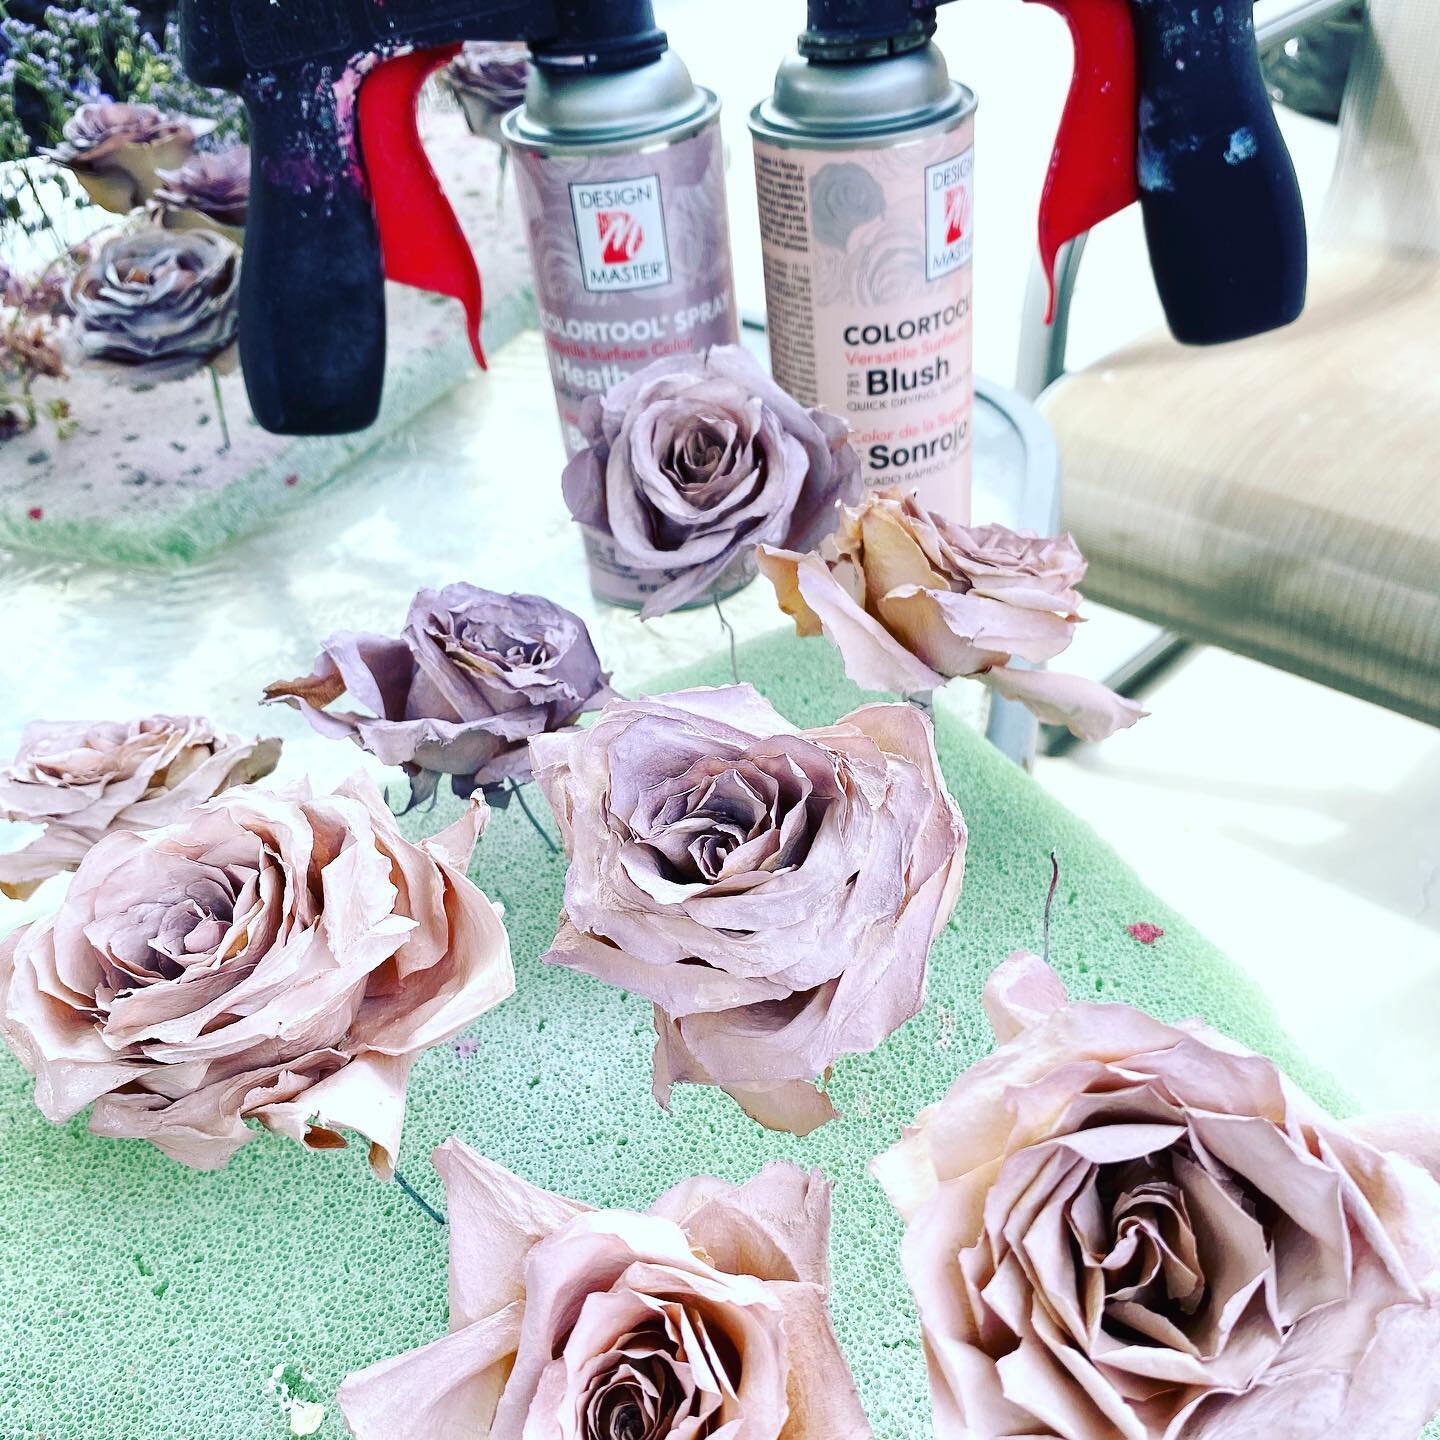 Blending Blush with some Heather to get the perfect Quicksand Rose.  #floralpreservation #designmasterpaint #quicksandroses #preservedflowers #preservedbridalbouquet